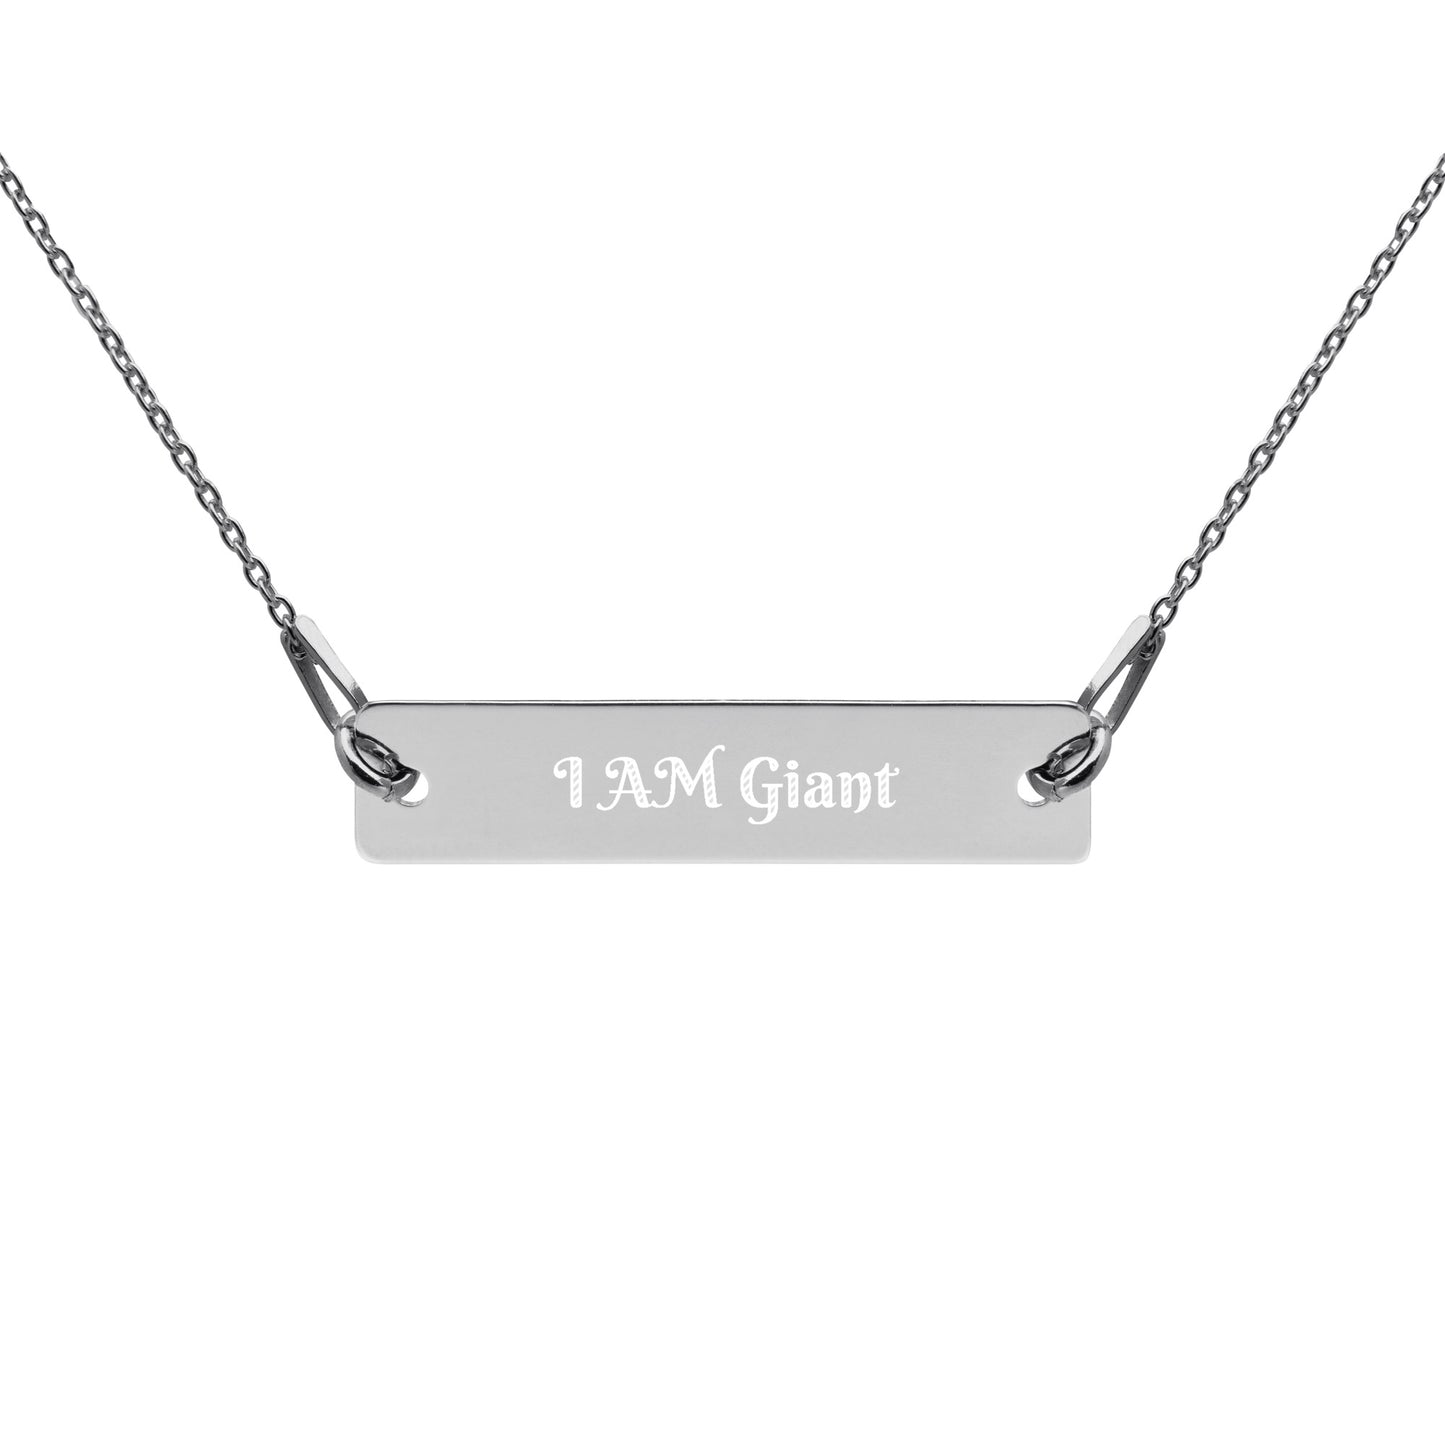 I AM Giant Engraved Silver Bar Chain Necklace